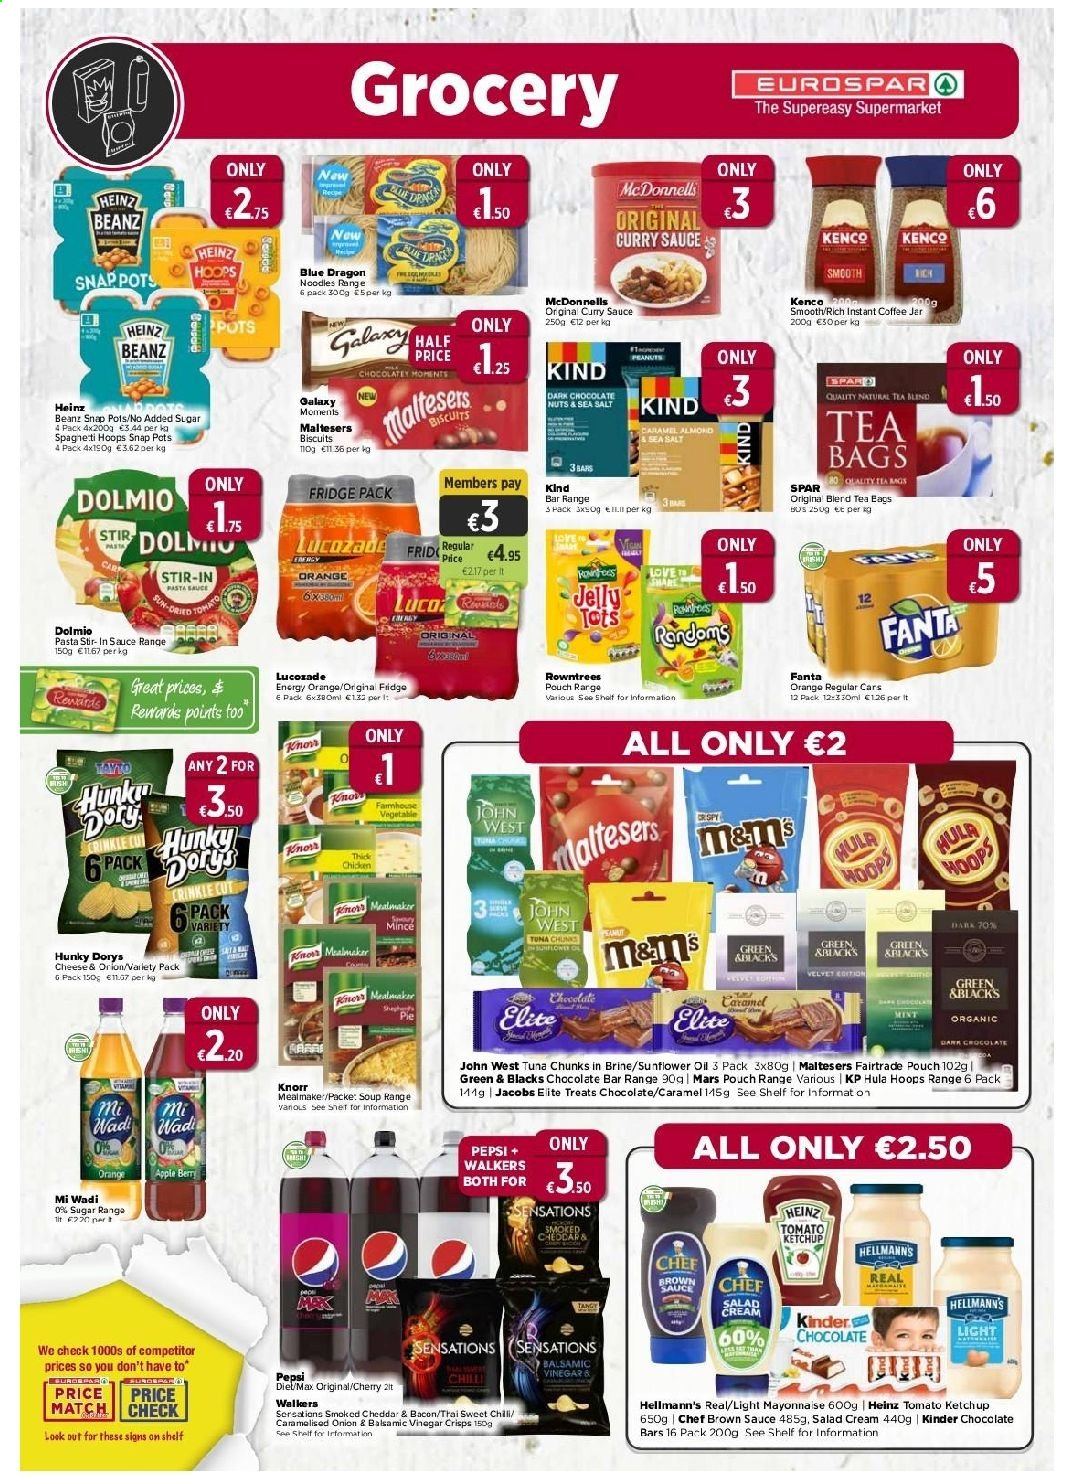 EUROSPAR offer  - 15.4.2021 - 5.5.2021 - Sales products - orange, tuna, pasta sauce, soup, Knorr, noodles, bacon, cheese, mayonnaise, salad cream, Hellmann’s, chocolate, Mars, jelly, biscuit, dark chocolate, Maltesers, Hula Hoops, Heinz, caramel, ketchup, brown sauce, curry sauce, balsamic vinegar, vinegar, peanuts, nuts, Pepsi, Fanta, Lucozade, tea bags, instant coffee, Jacobs, Cars, Moments. Page 6.